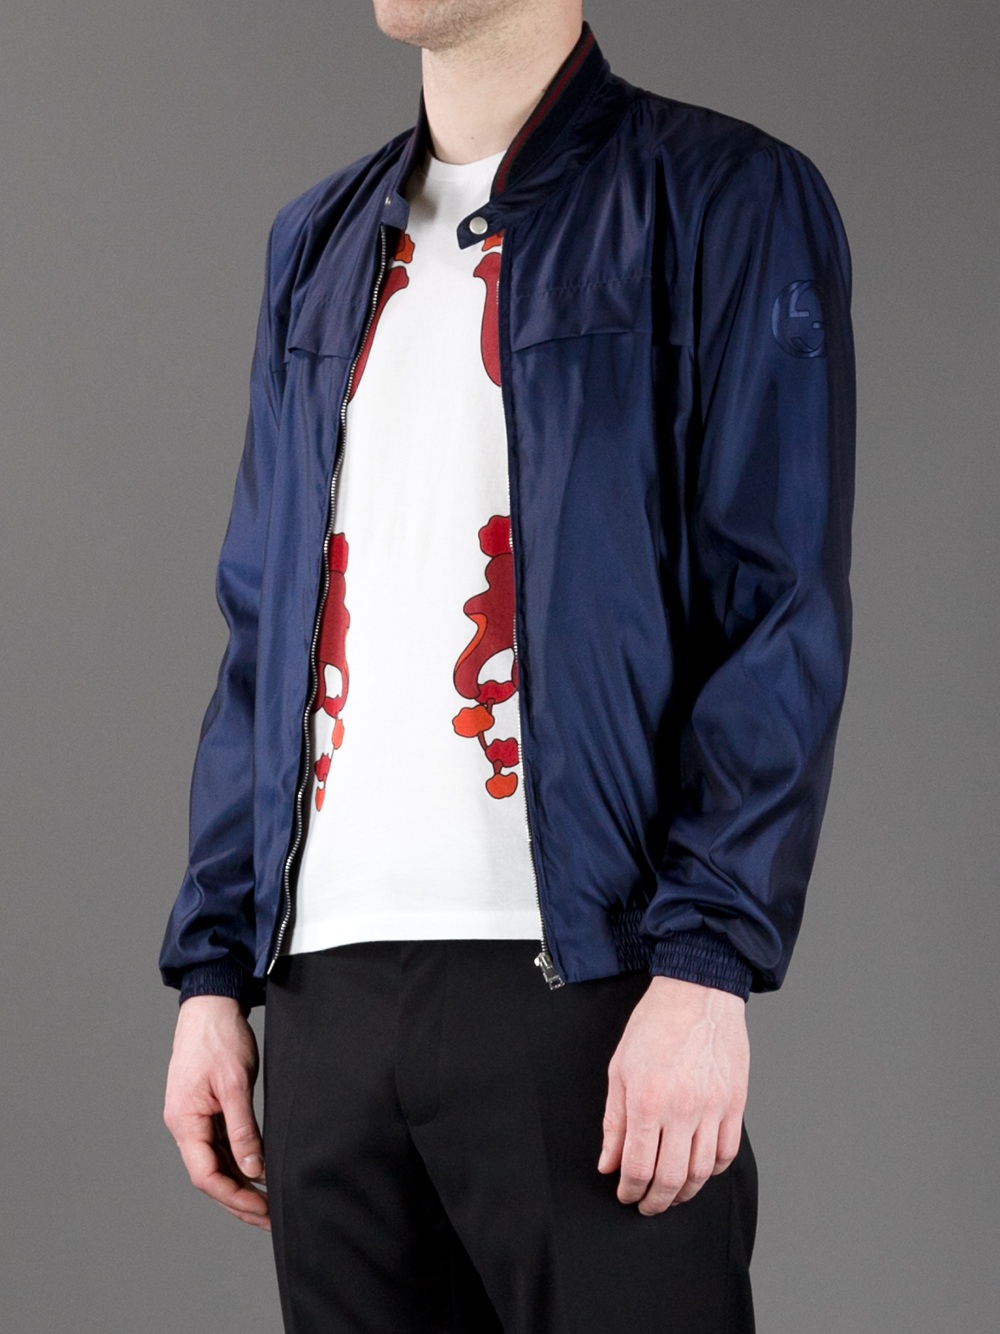 Gucci Bomber Jacket in Navy (Blue) for Men - Lyst